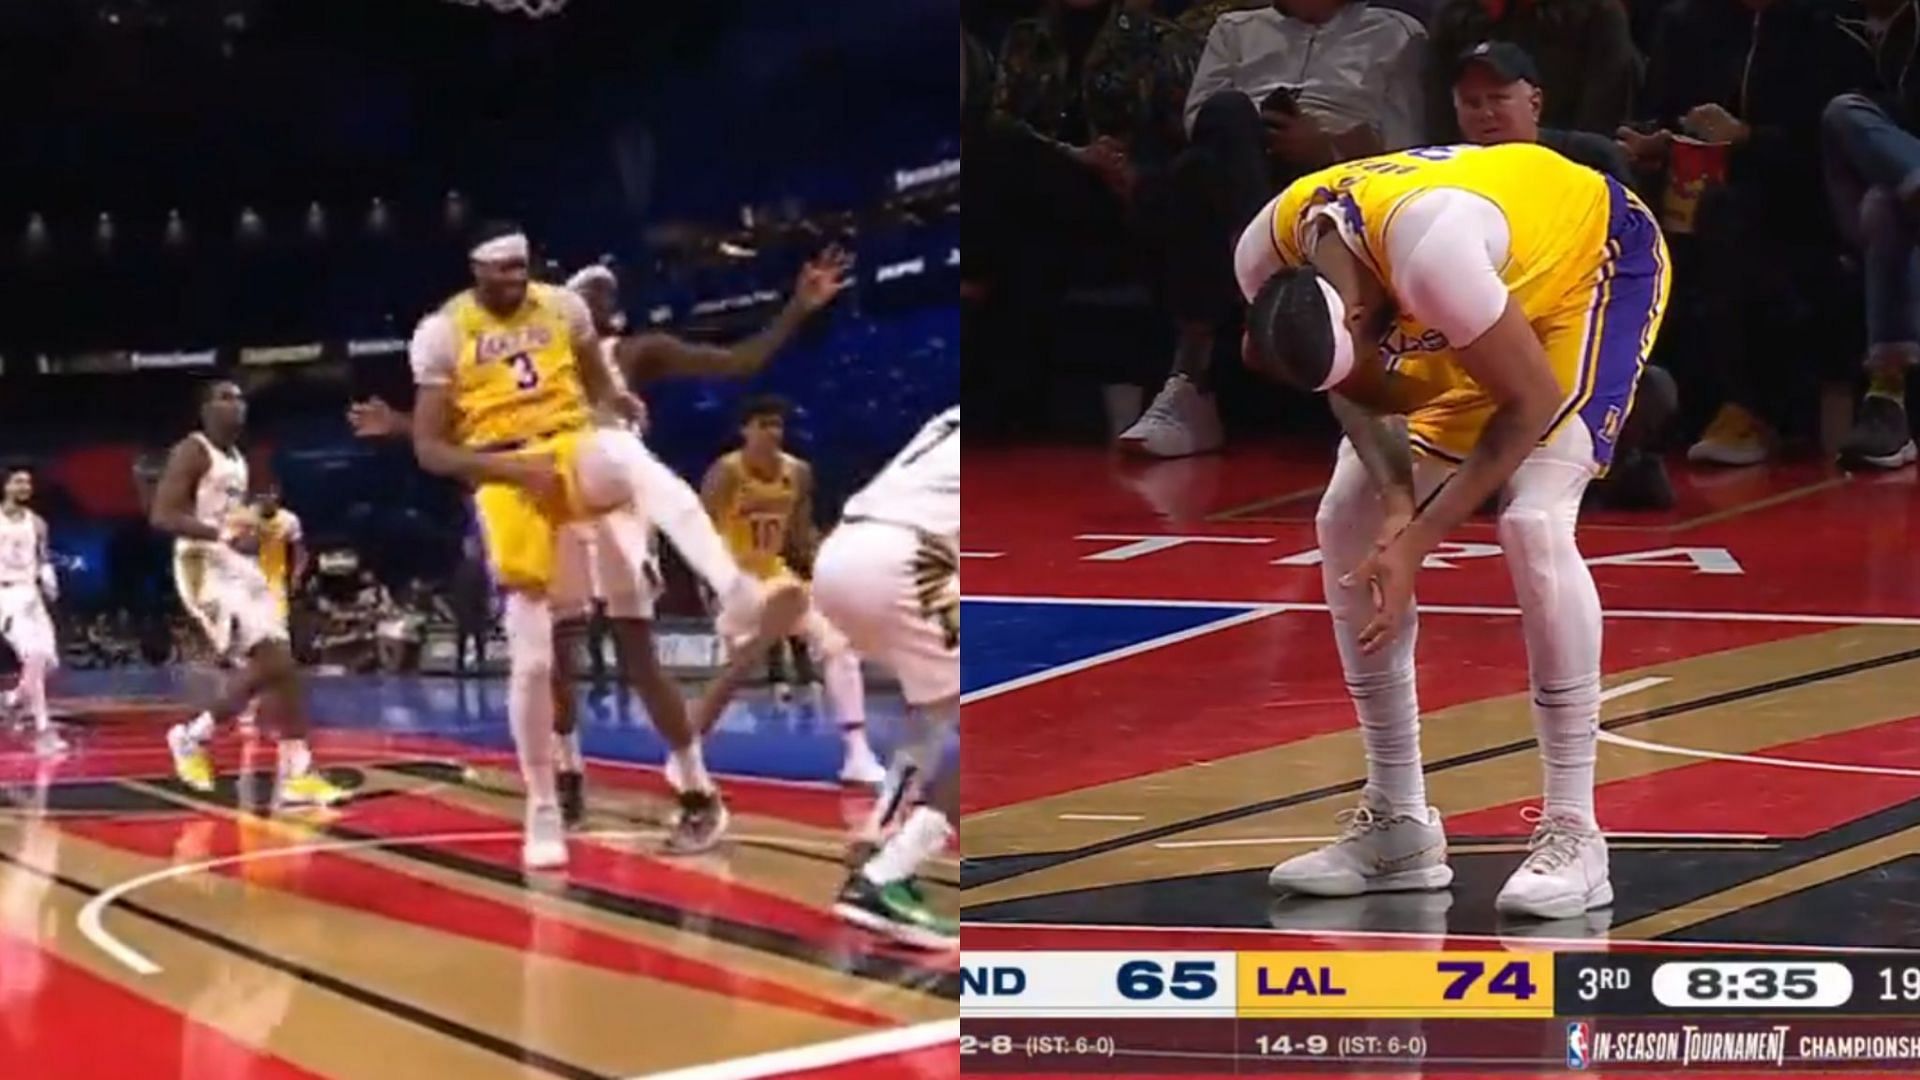 Anthony Davis gets involved in a bizarre sequence of play after getting an untimely groin injury